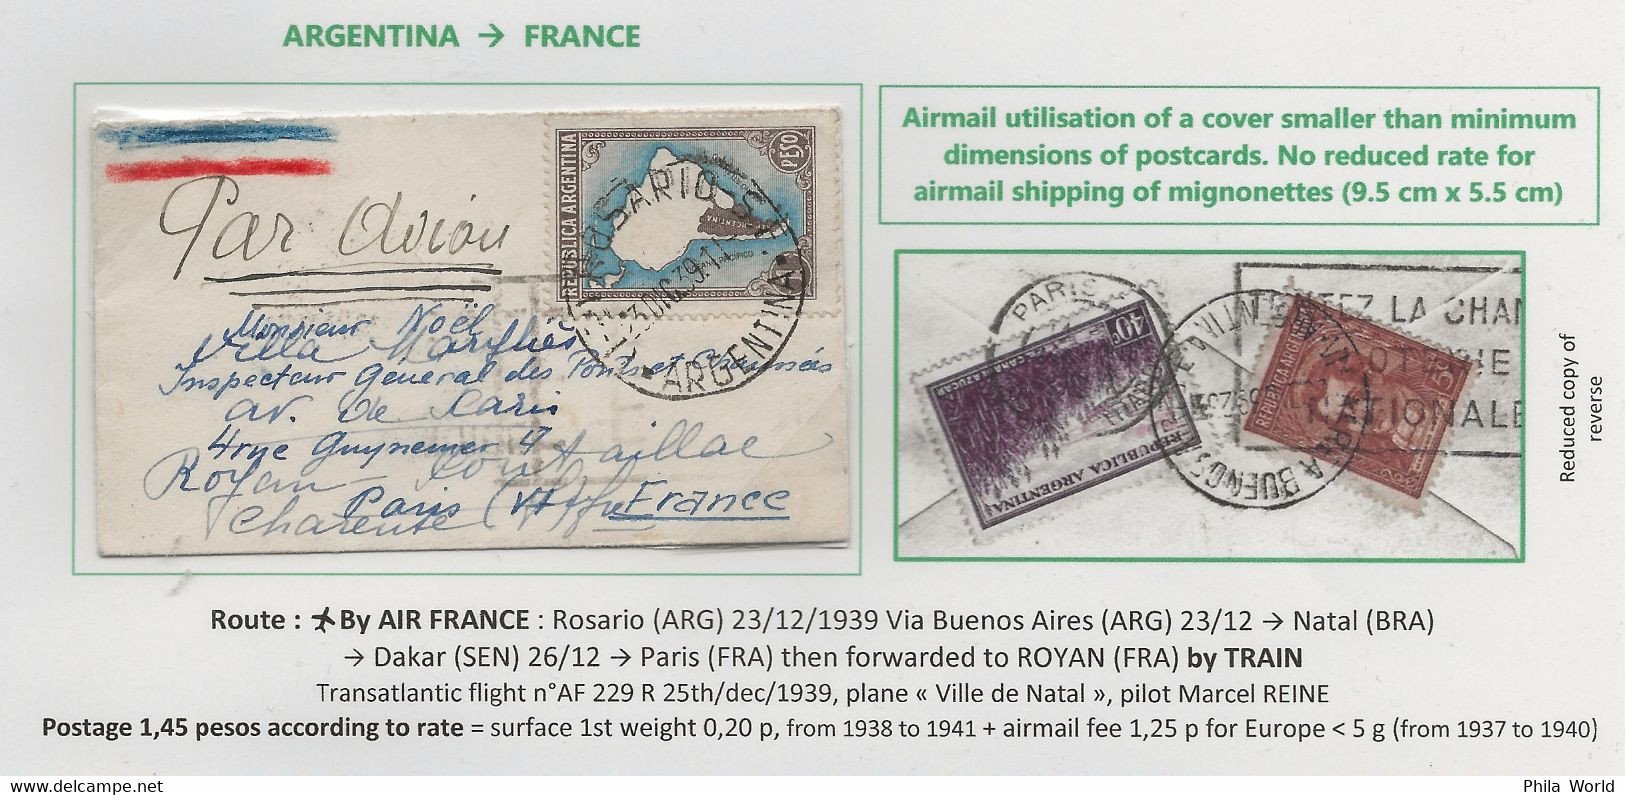 AIR FRANCE 1939 Argentina Rosario France Air Mail Cover Mignonette To Paris Forwarded Royan AF 229 R REINE - Covers & Documents